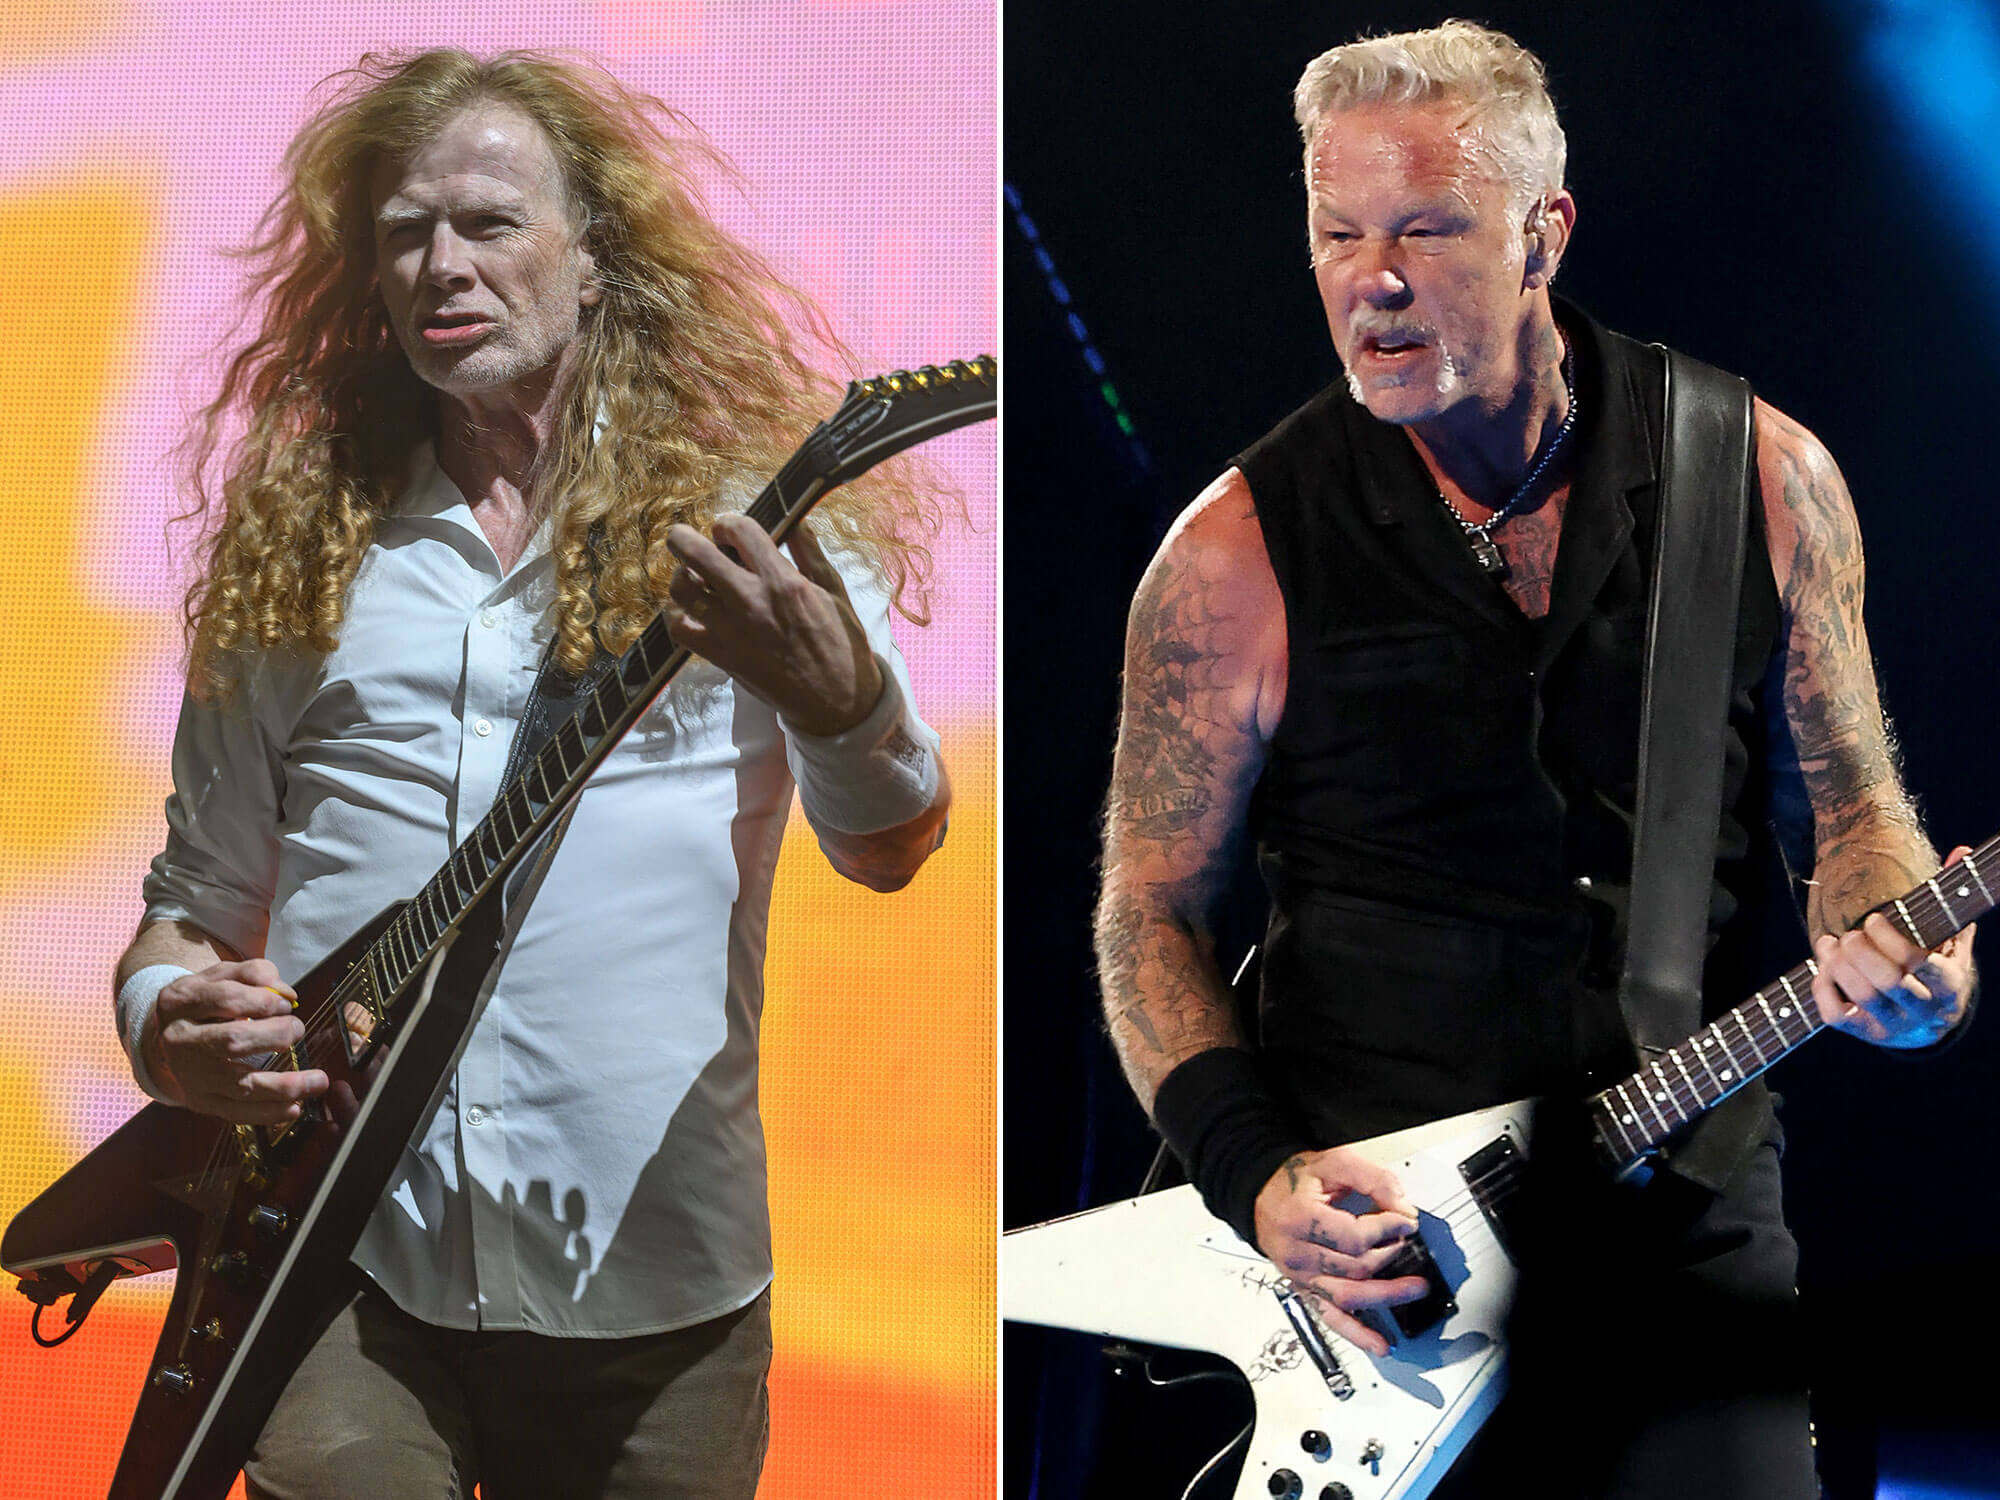 [L-R] Dave Mustaine and James Hetfield